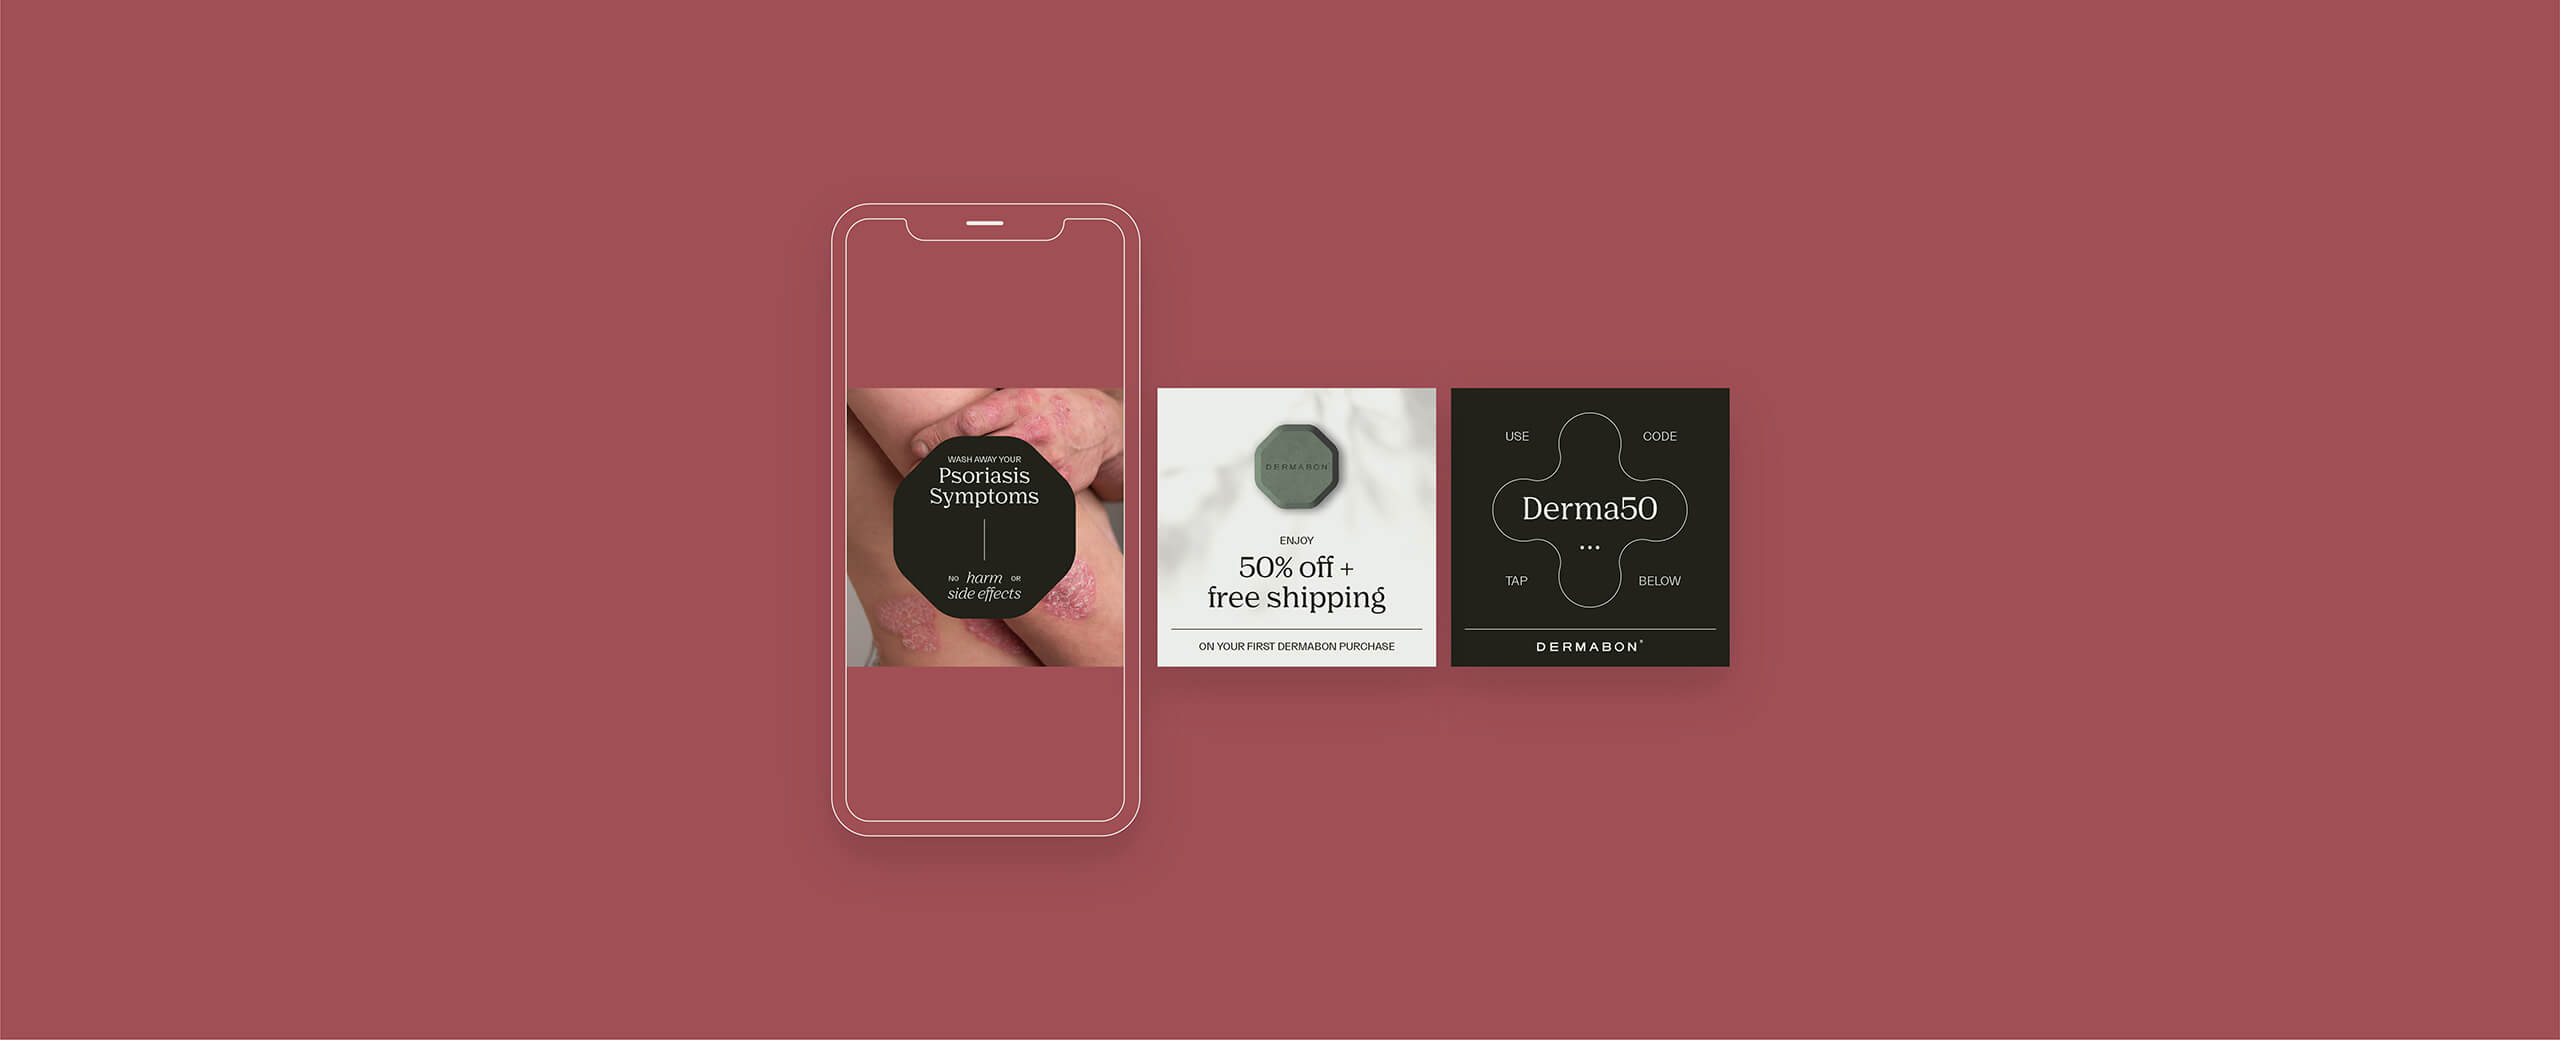 Dermabon - Ad Campaign by Phidev